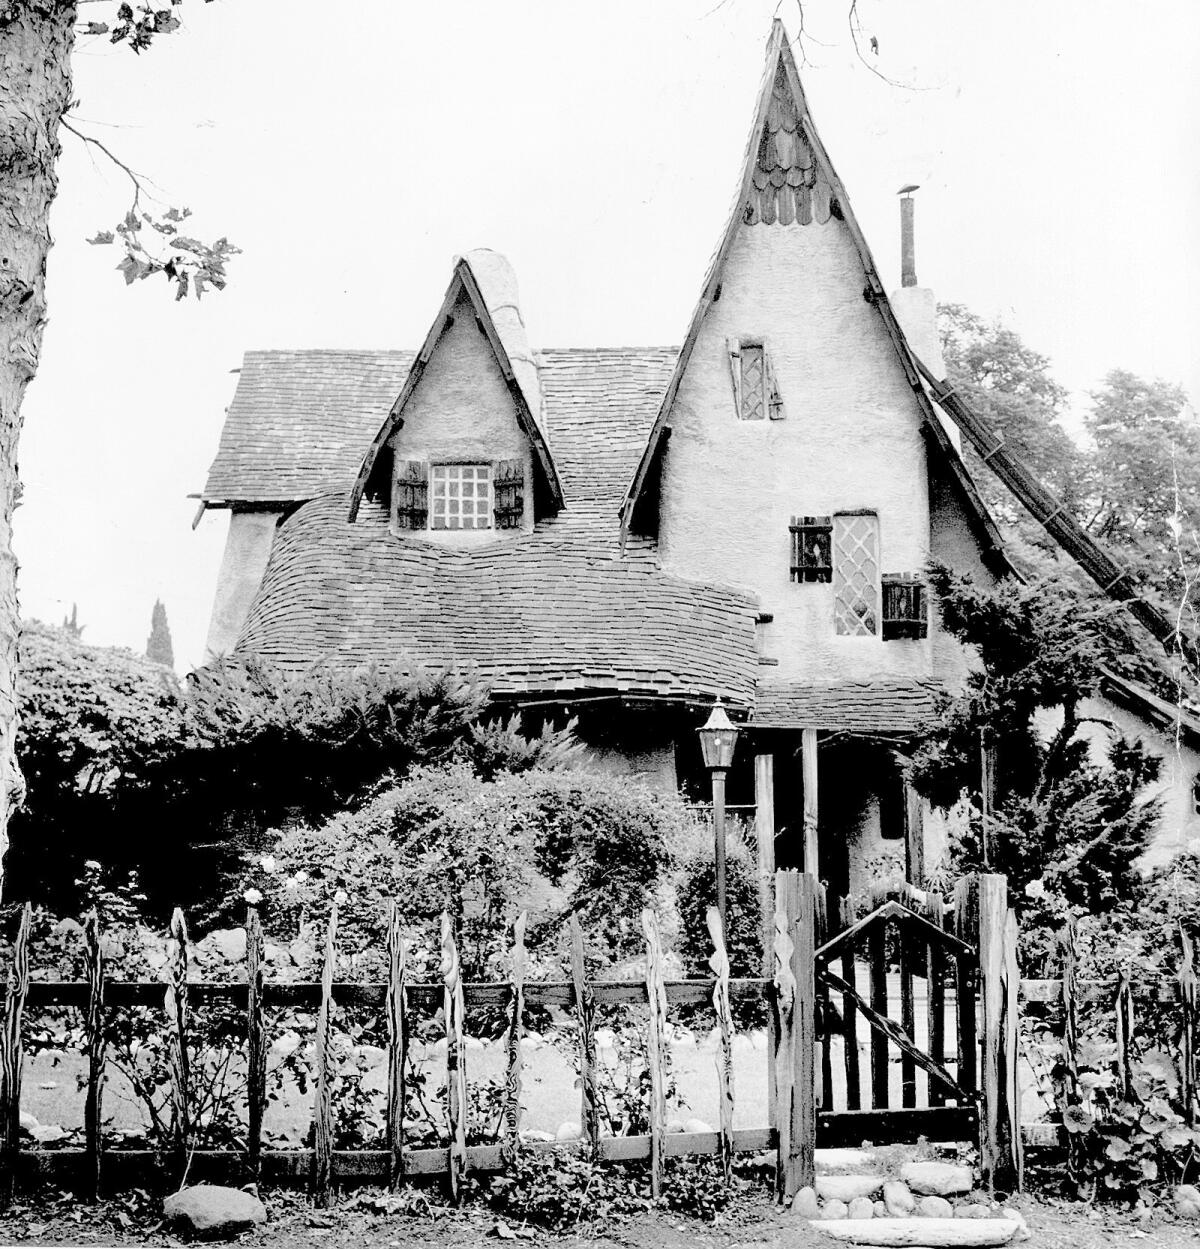 RE.0412.Spadena.1ññ File Photoññ CALIFORNIAññ Spadena House, also known as "the witch's house," located at Walden Drive and Carmelita Avenue in Beverly Hills. The storybook house was once on a movie lot in Culver City. Staff file photo by Mary Frampton/Los Angeles Times.